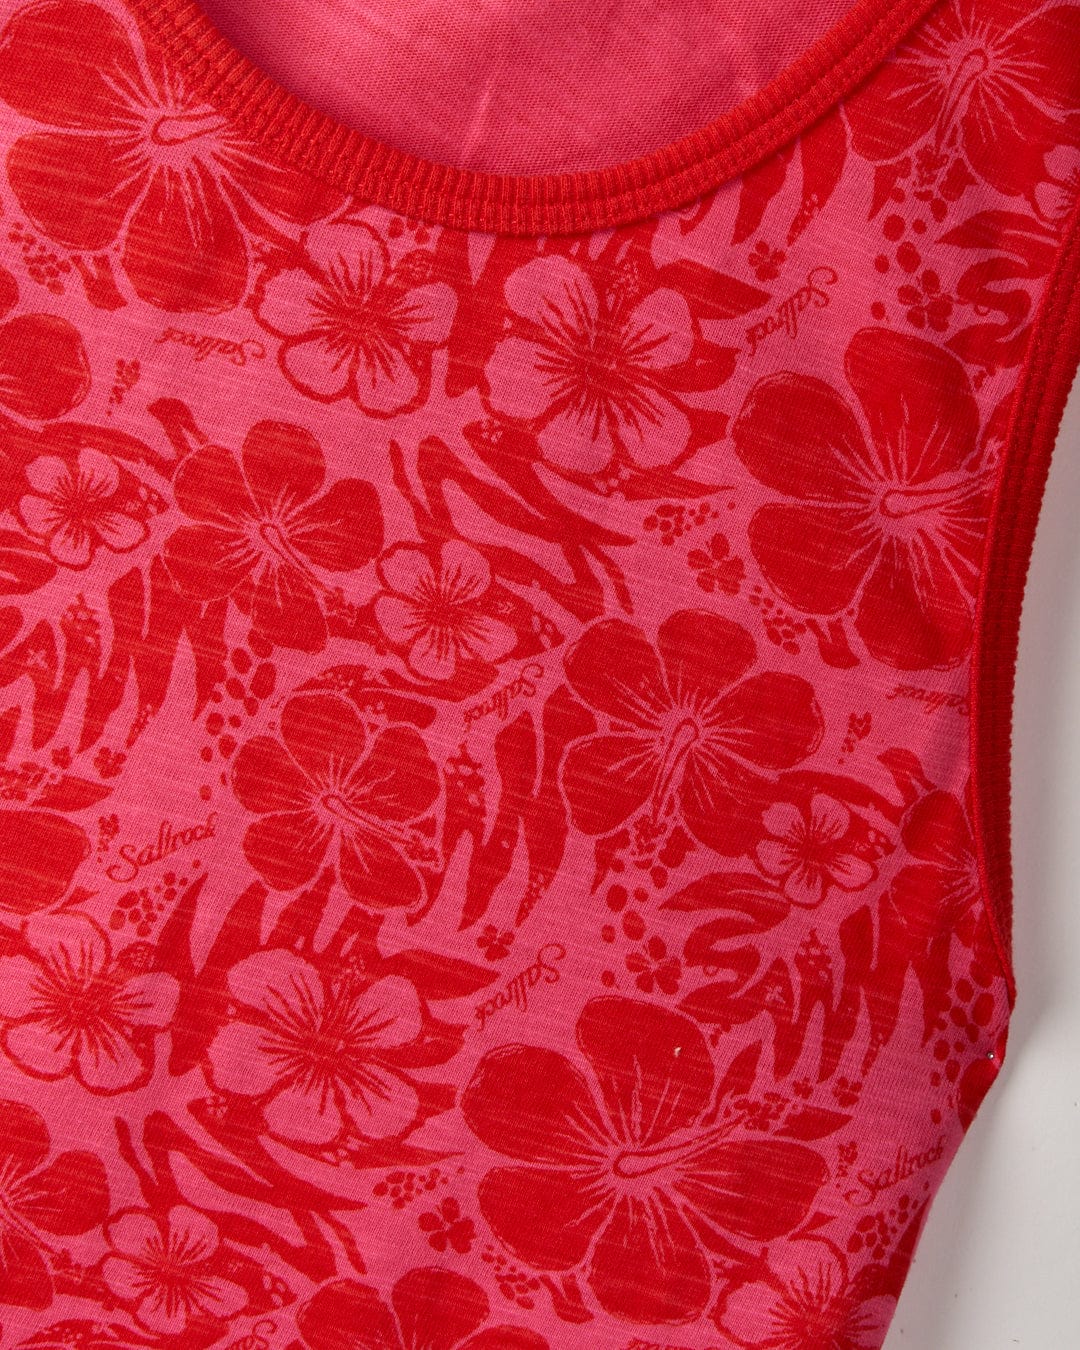 Close-up of a red and pink floral-patterned fabric featuring a vibrant hibiscus print, with the word "Saltrock" repeated throughout. The 100% cotton material is machine washable for easy care. This is the "Hibiscus - Women's Vest - Red" by Saltrock.